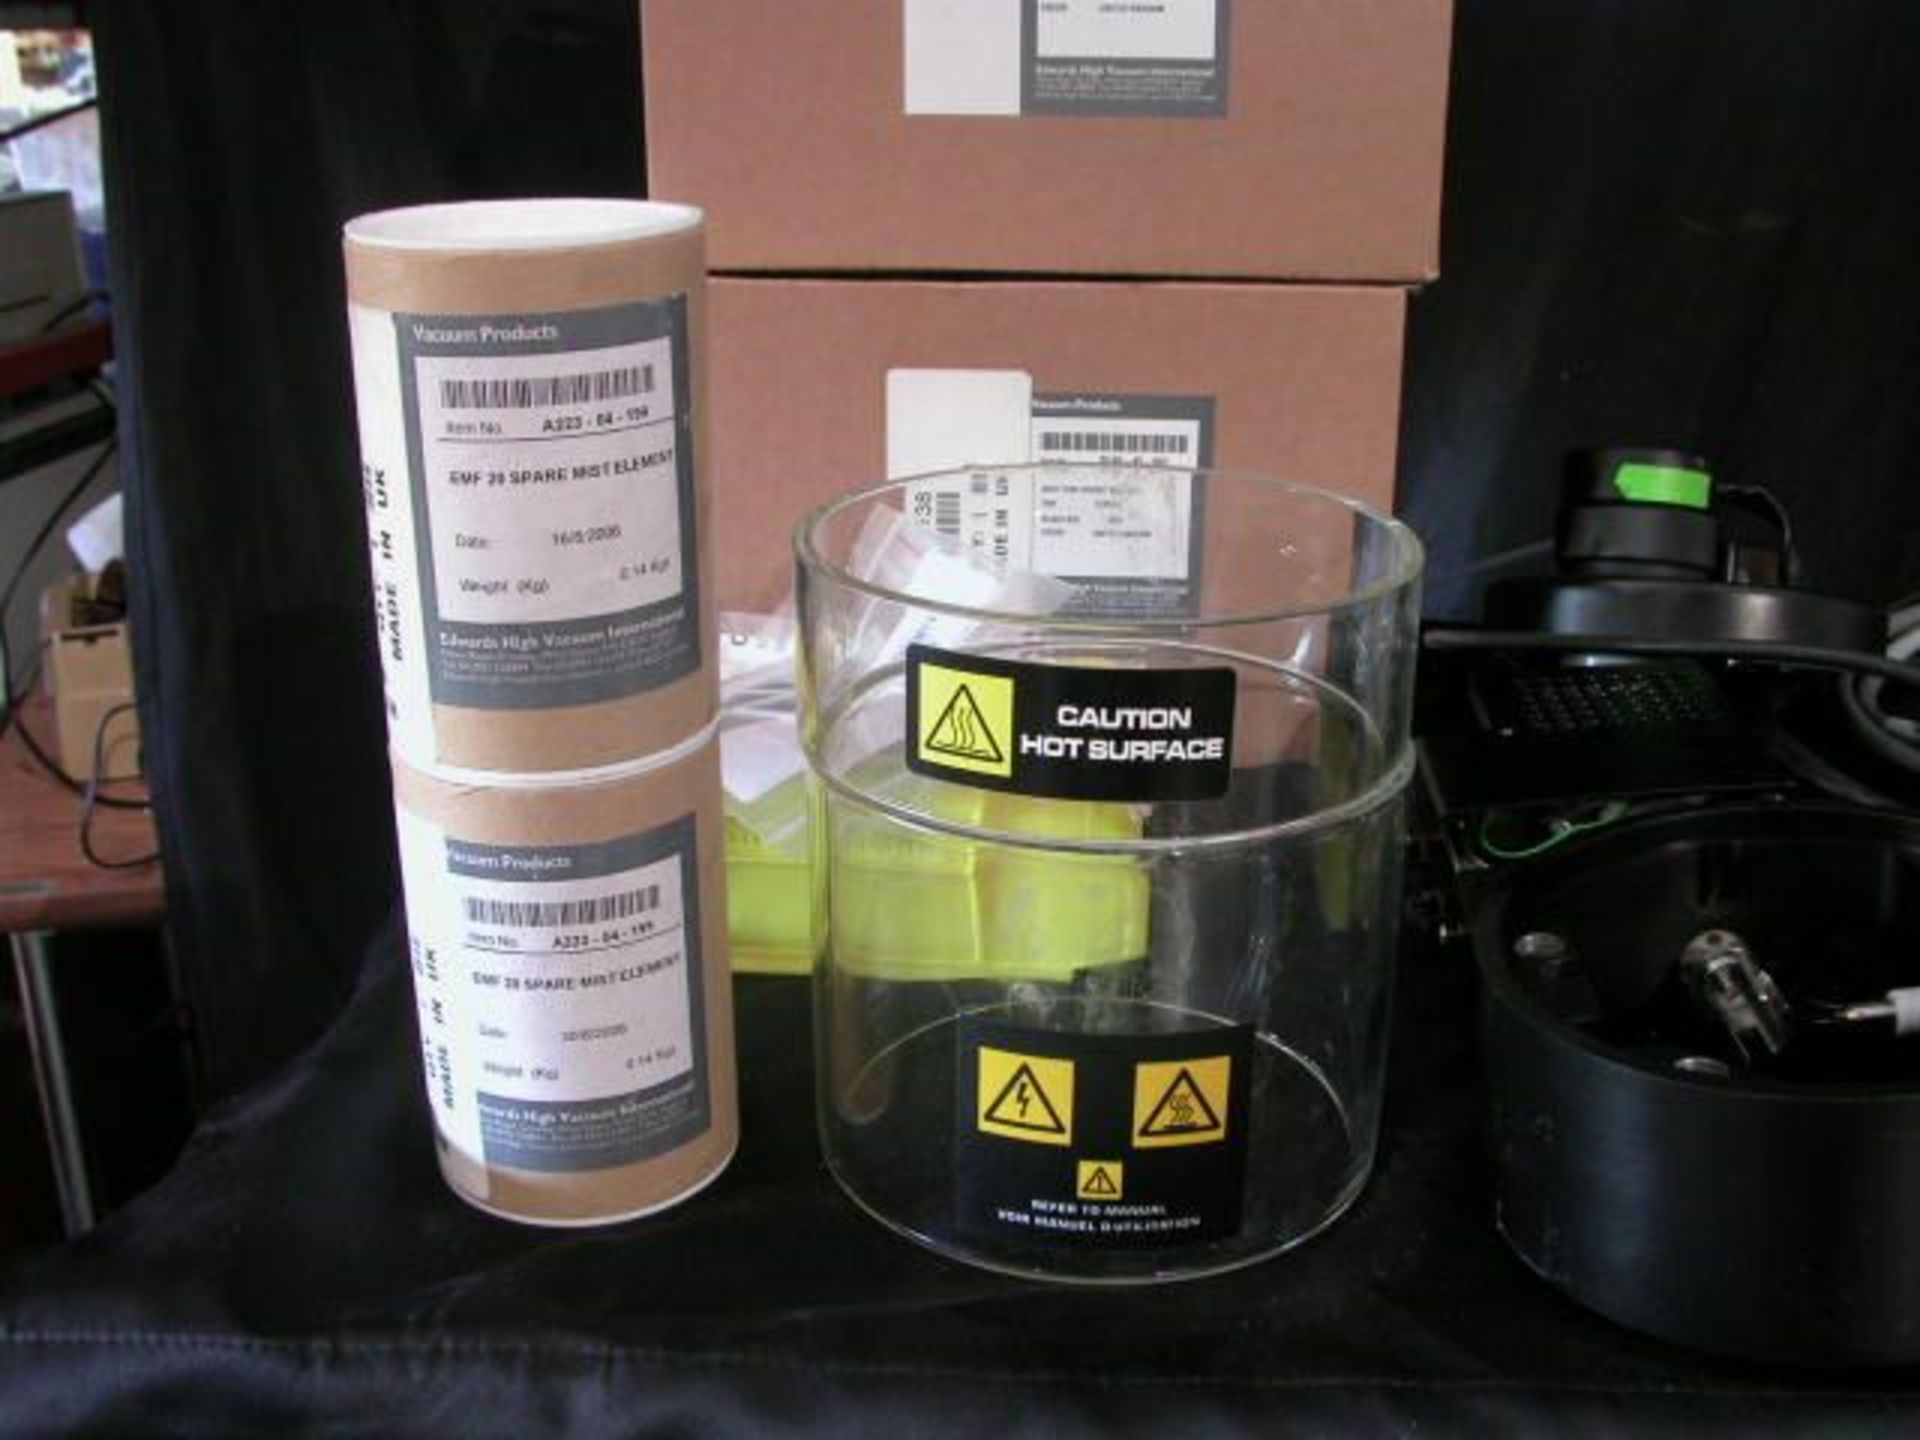 Waters/Micromass Q-Tof Ultima Mass Spectrometer P.M. KIT W/ Extras, Qty 1, 321118842113 - Image 2 of 13